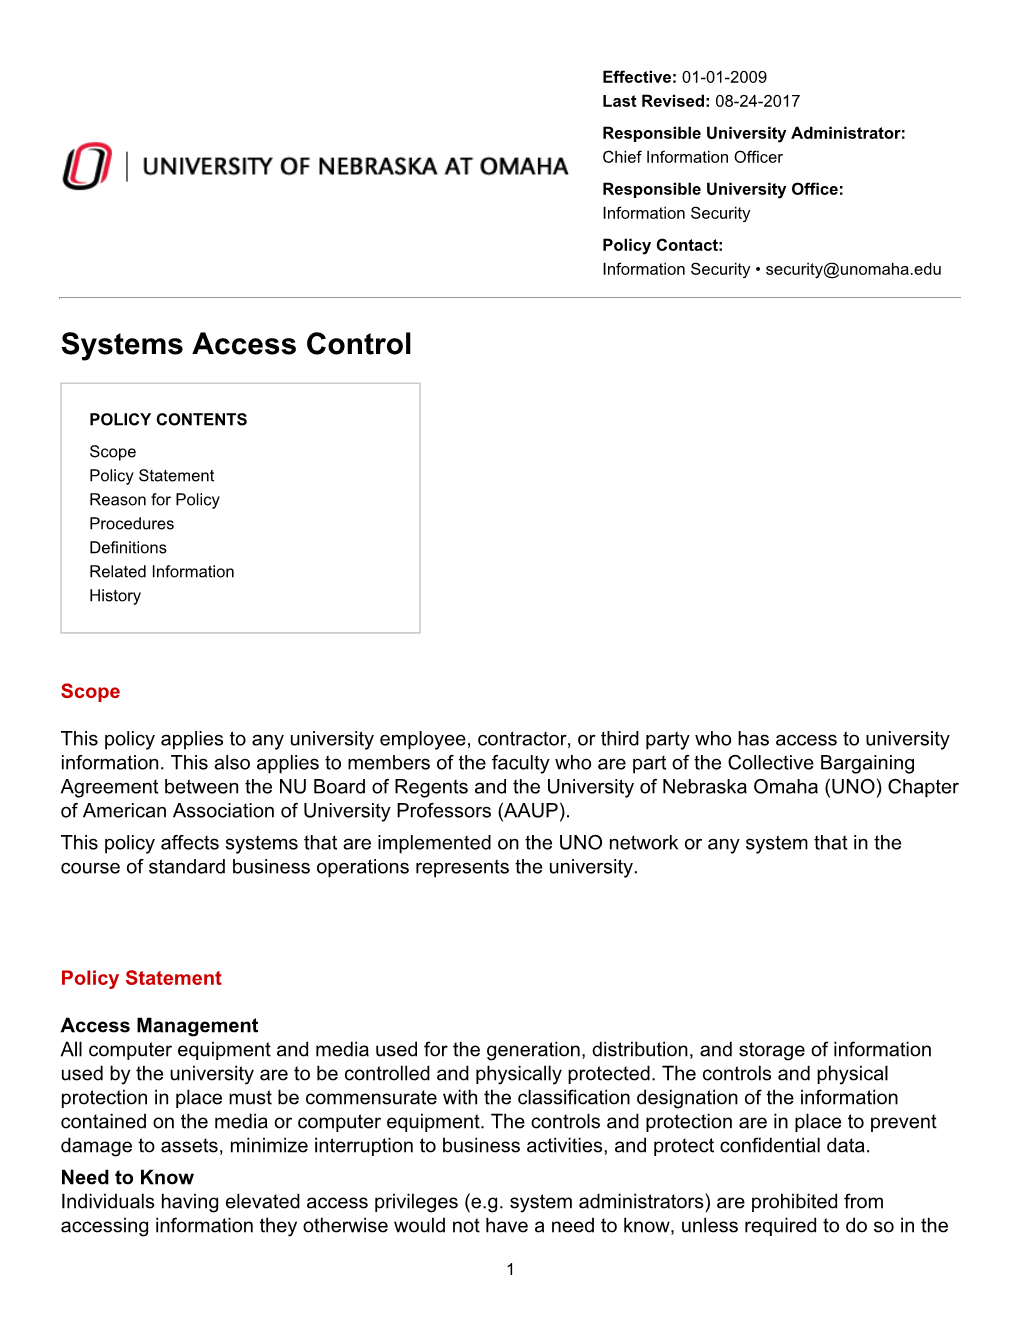 Systems Access Control